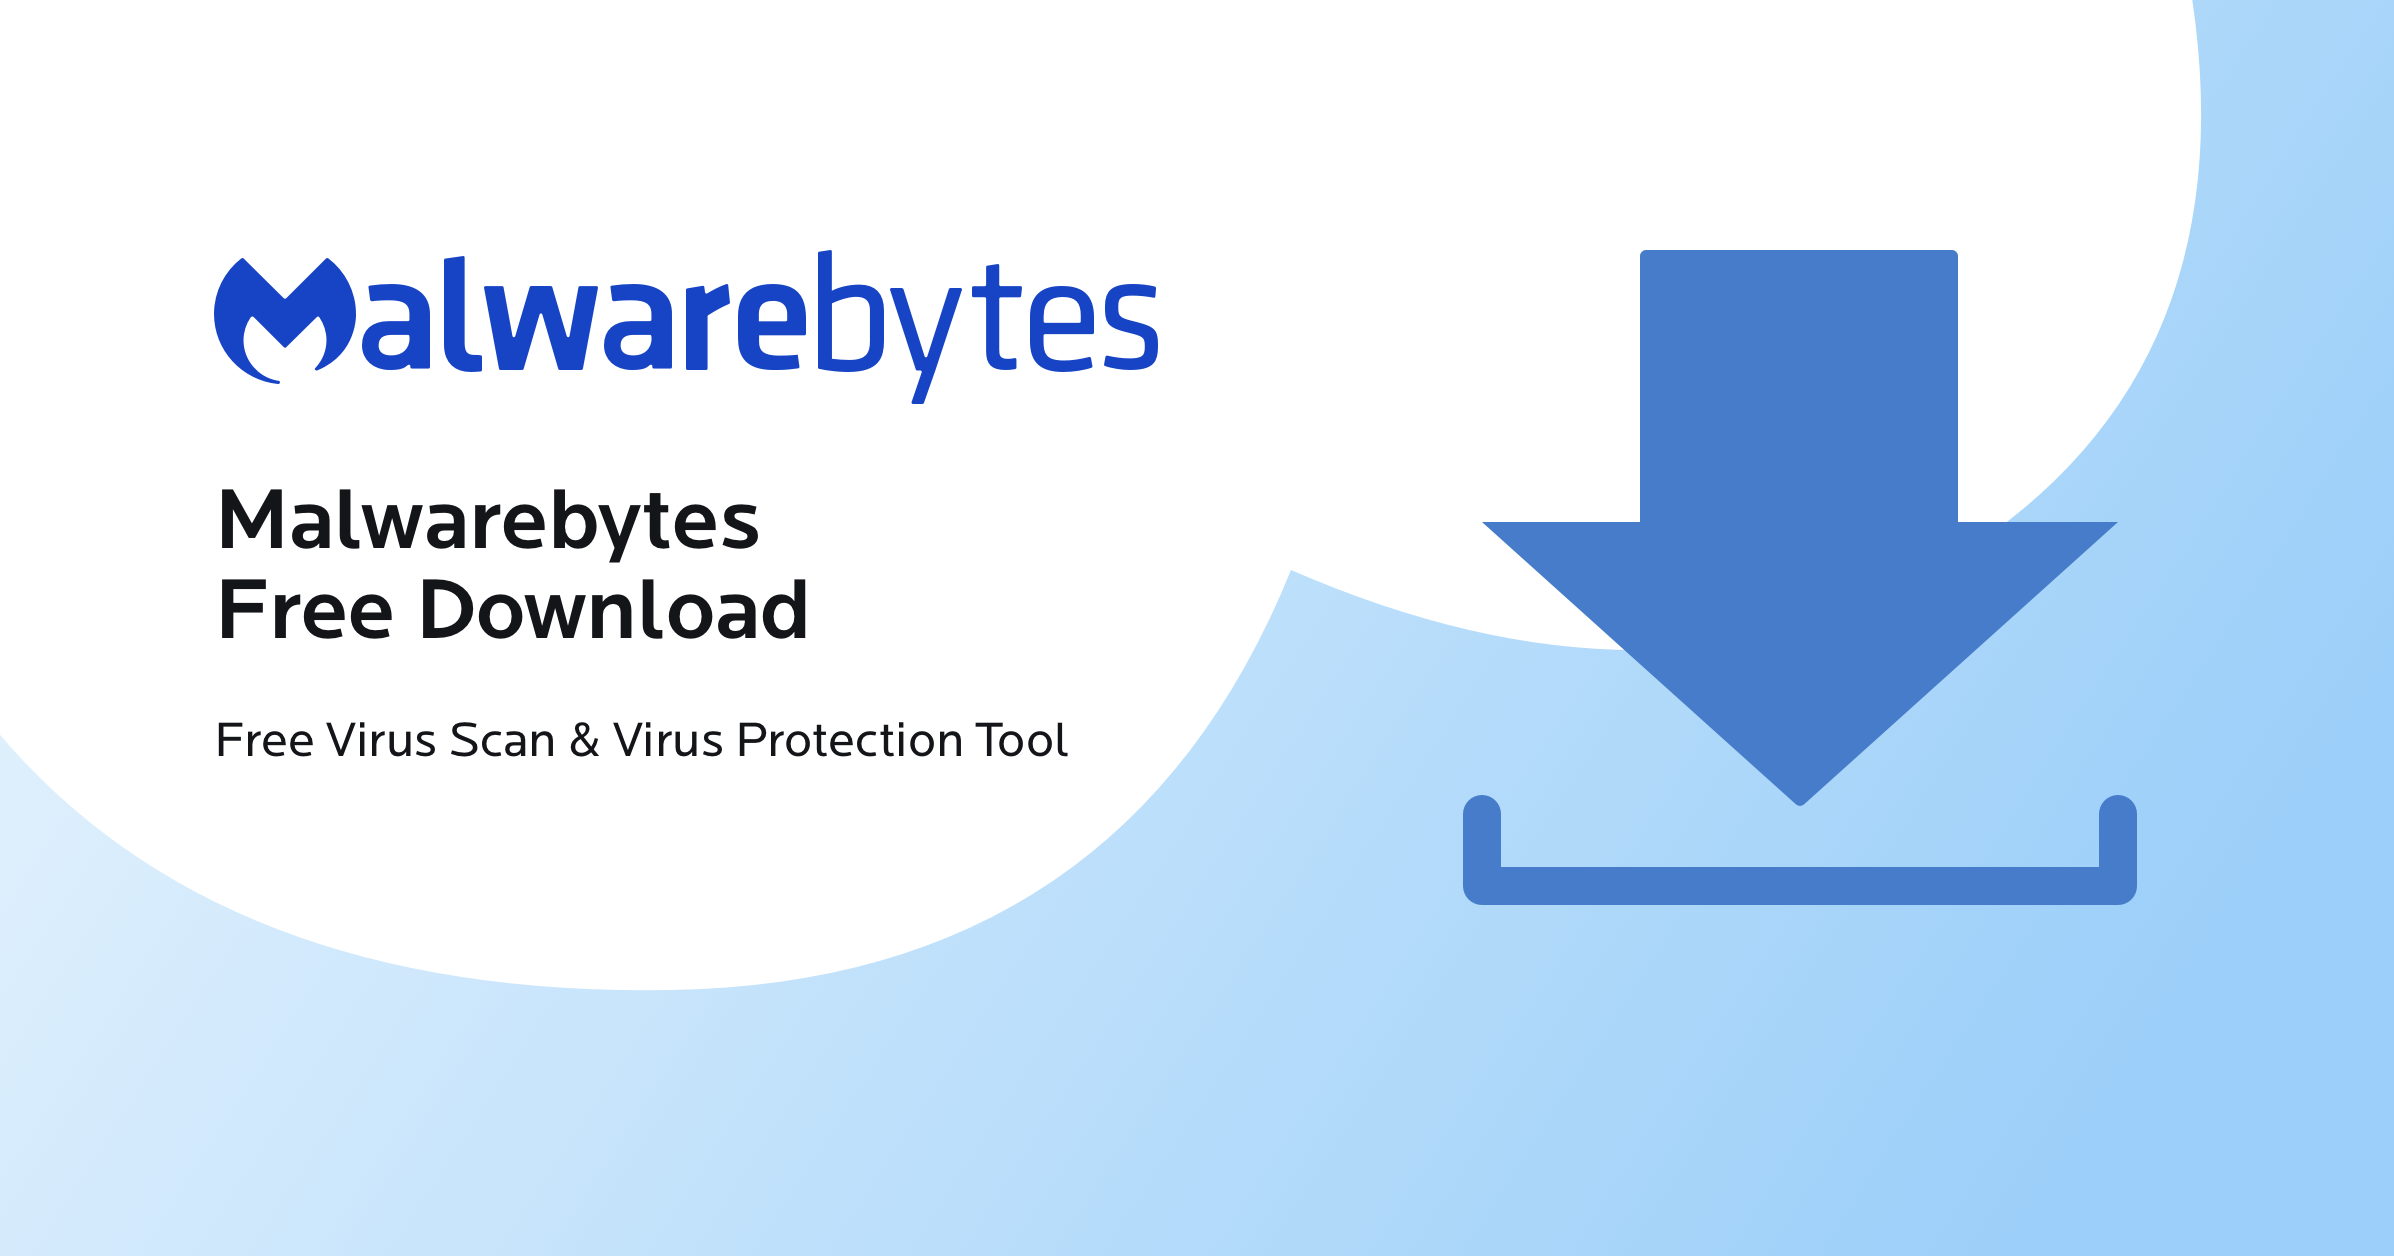 Download and install a reputable anti-malware software
Run a full system scan and remove any detected threats